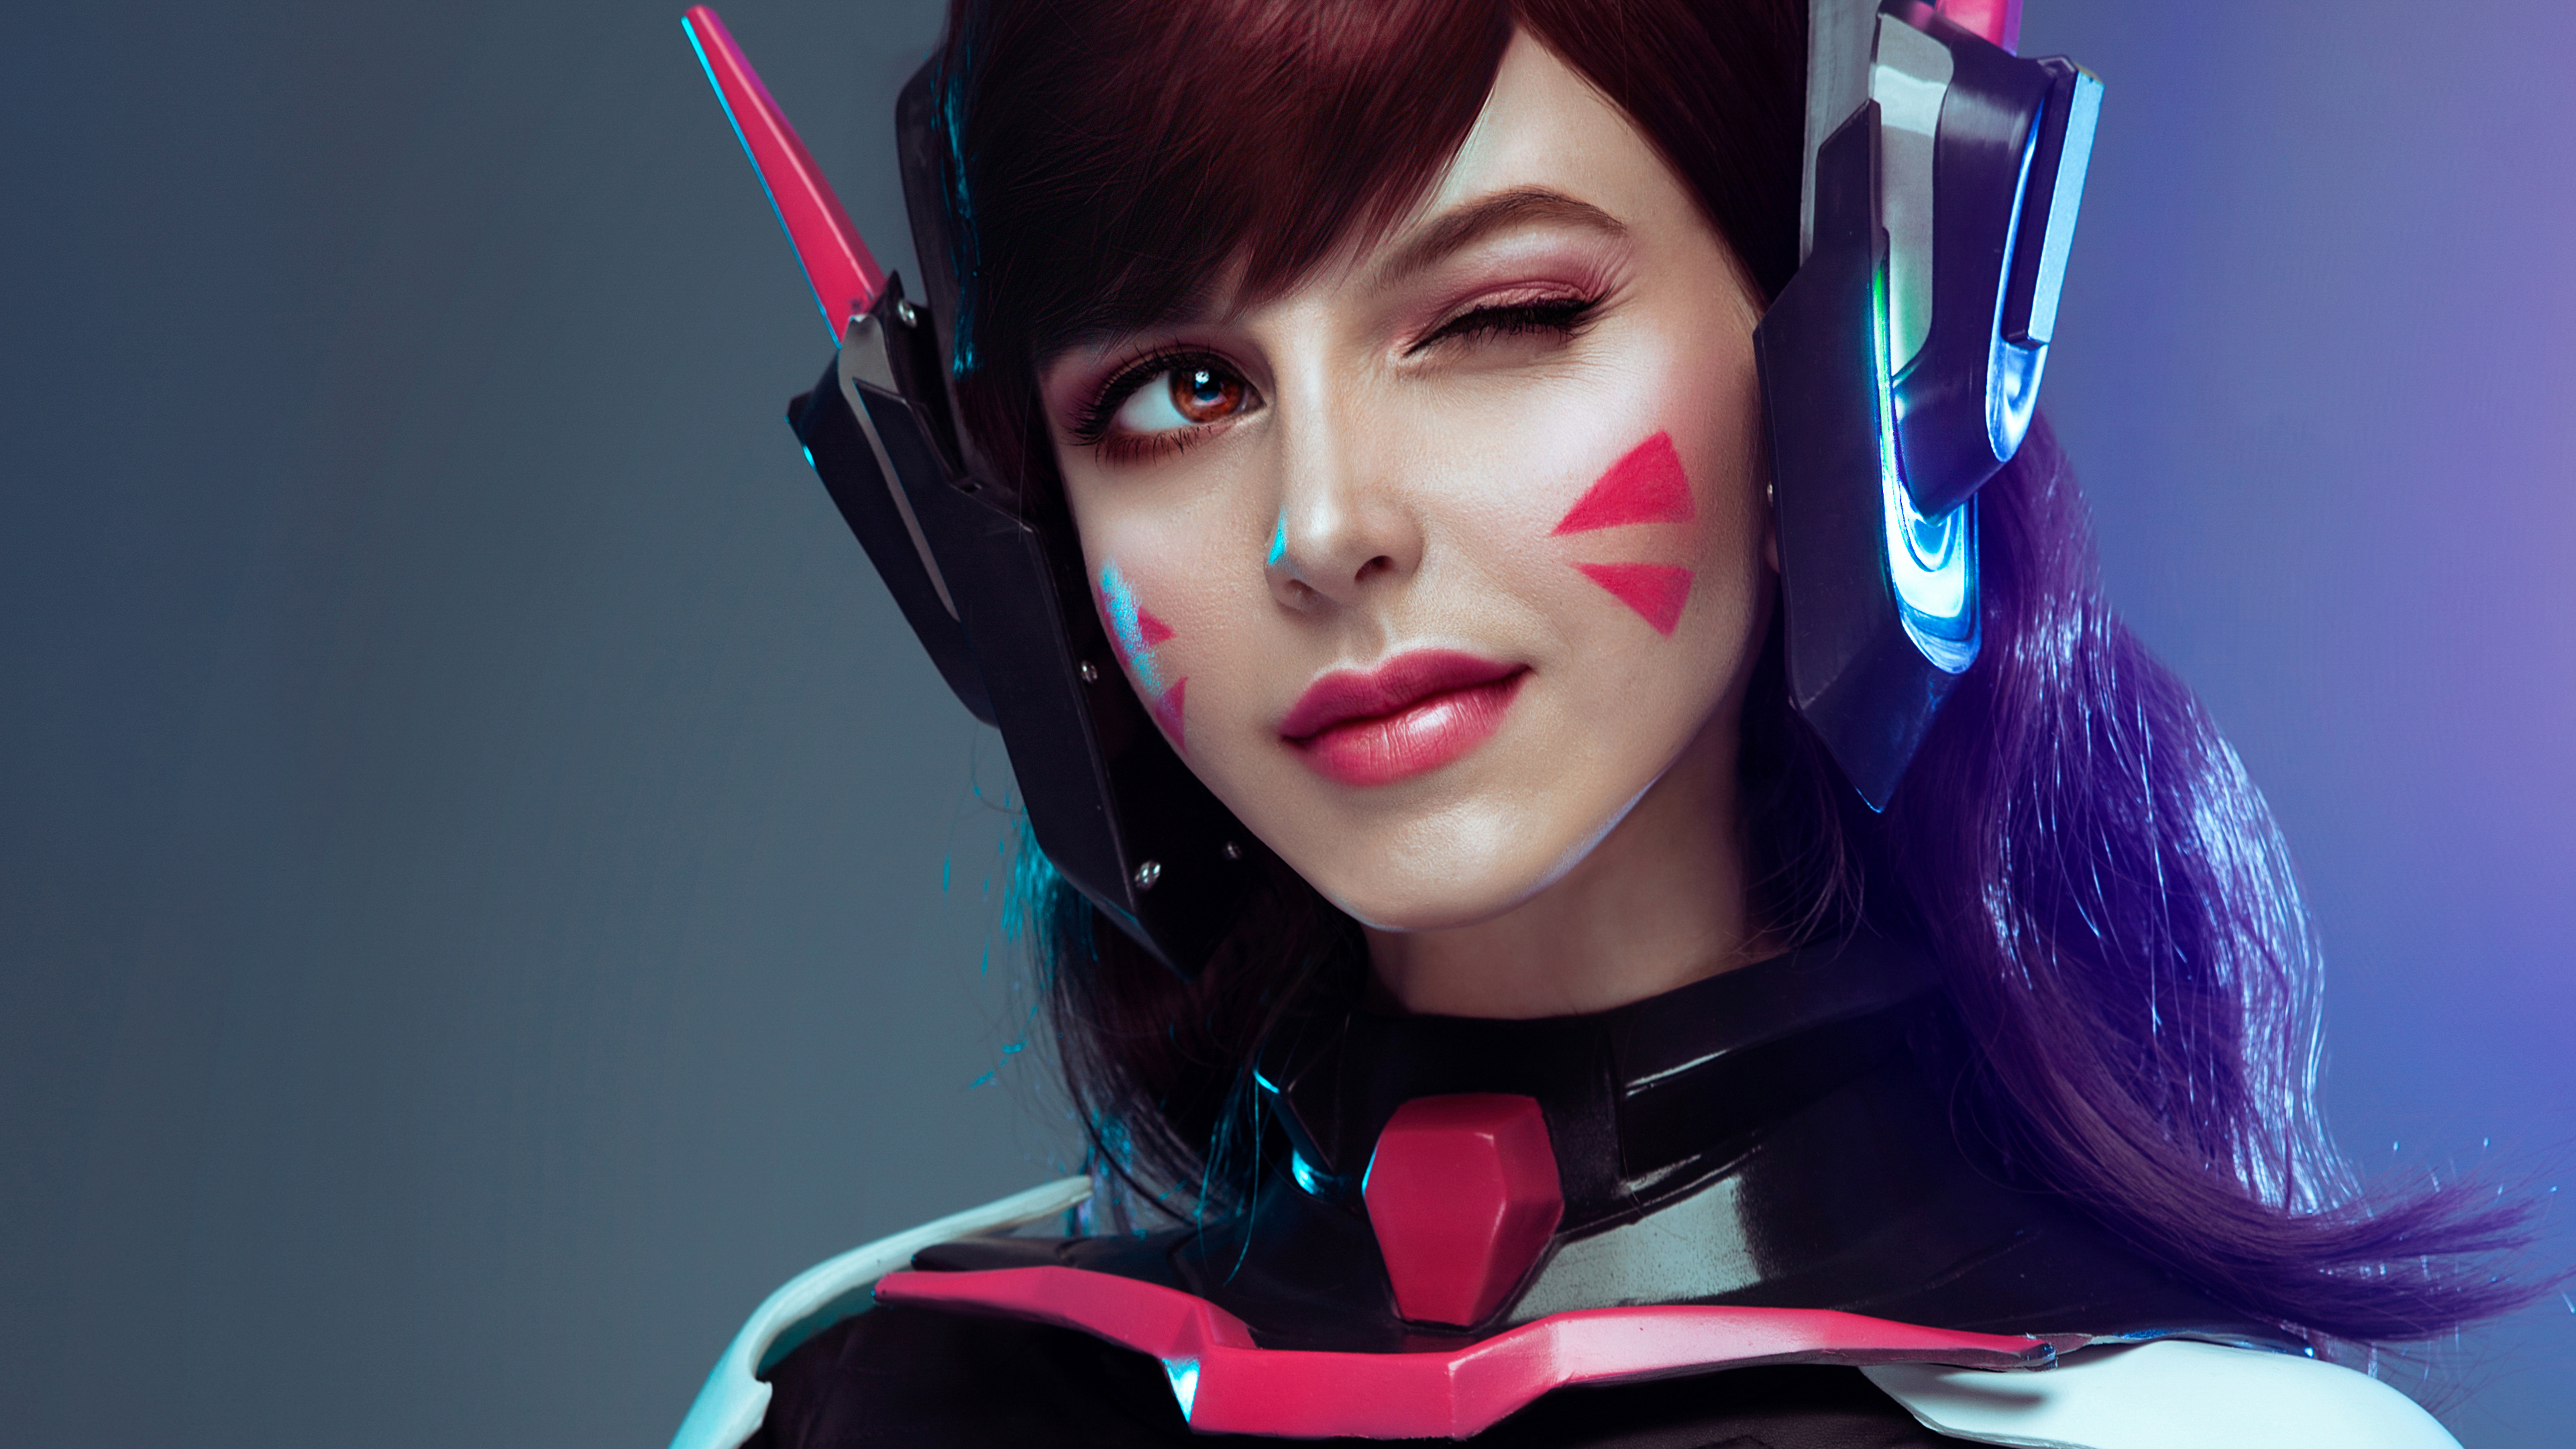 Dva From Overwatch Cosplay Wallpaper Hd Games Wallpapers 4k Wallpapers Images Backgrounds Photos